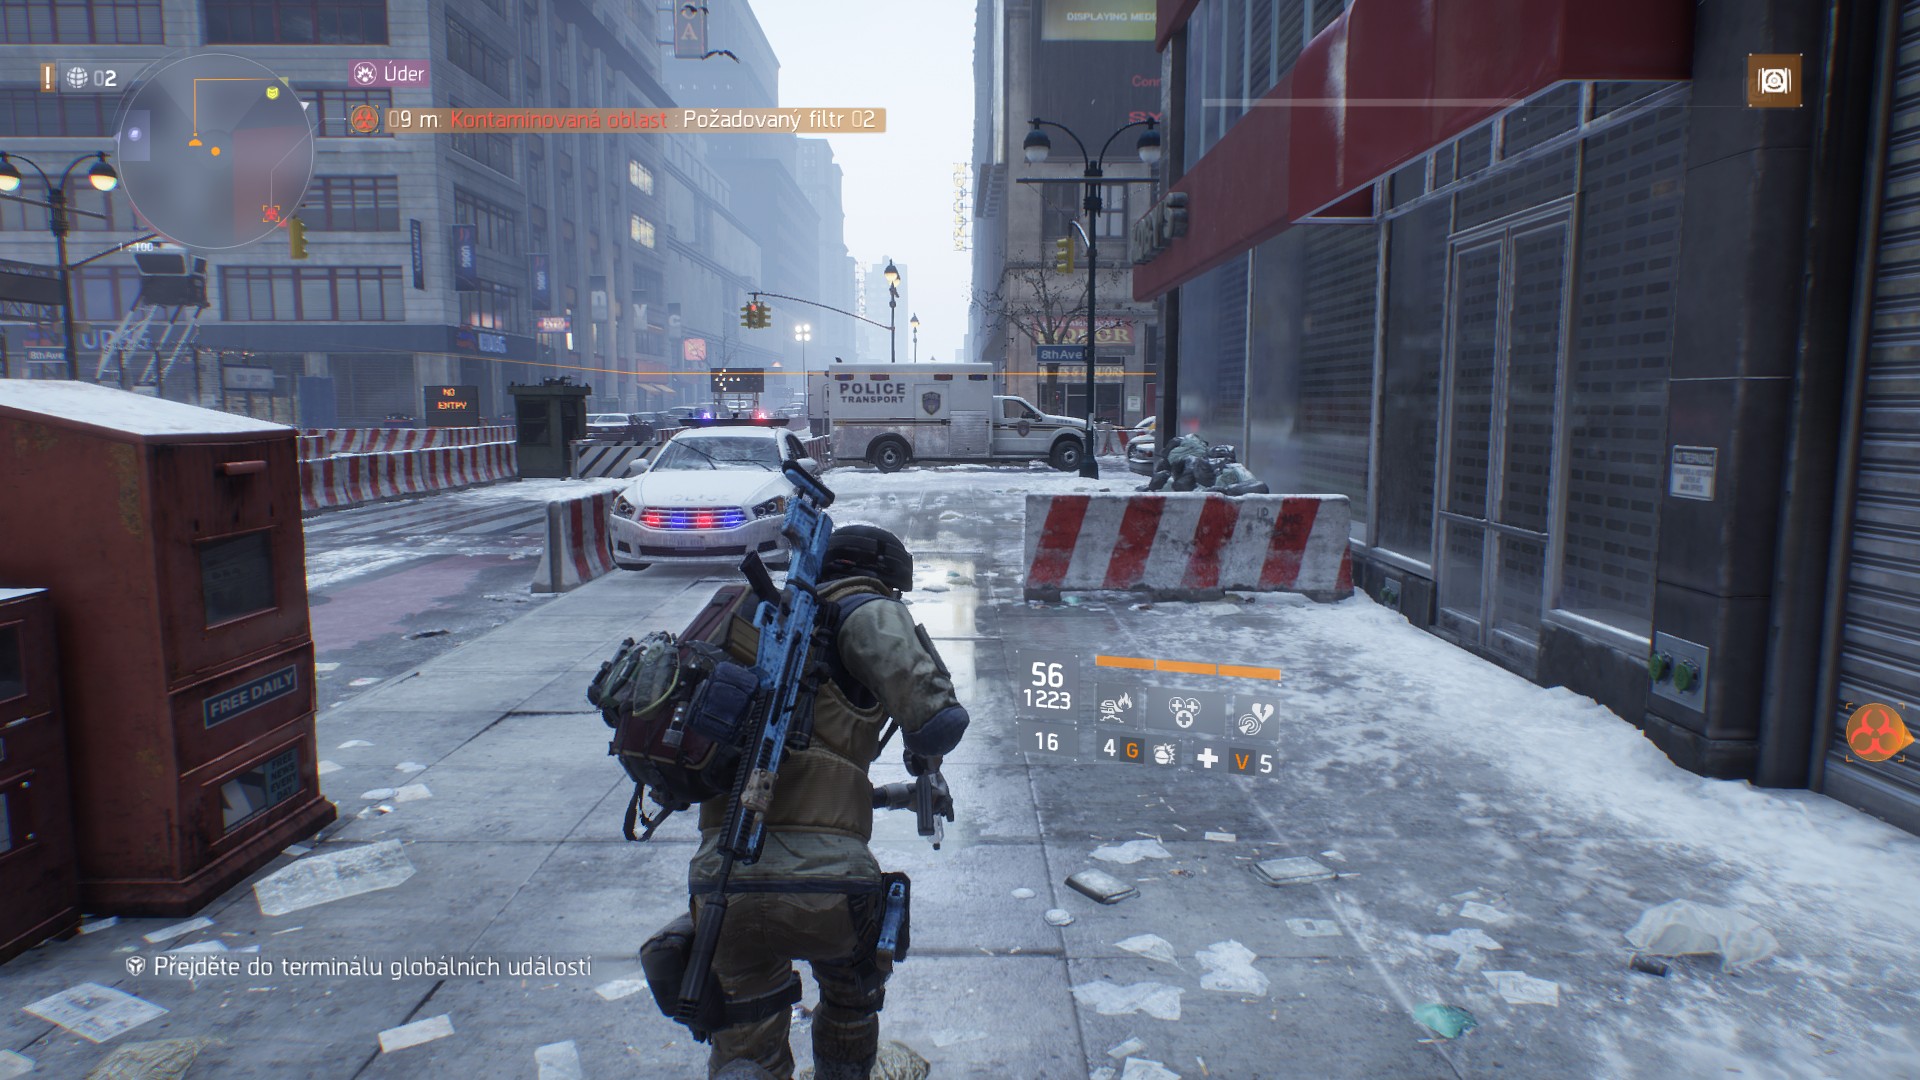 TOM CLANCY’S THE DIVISION™